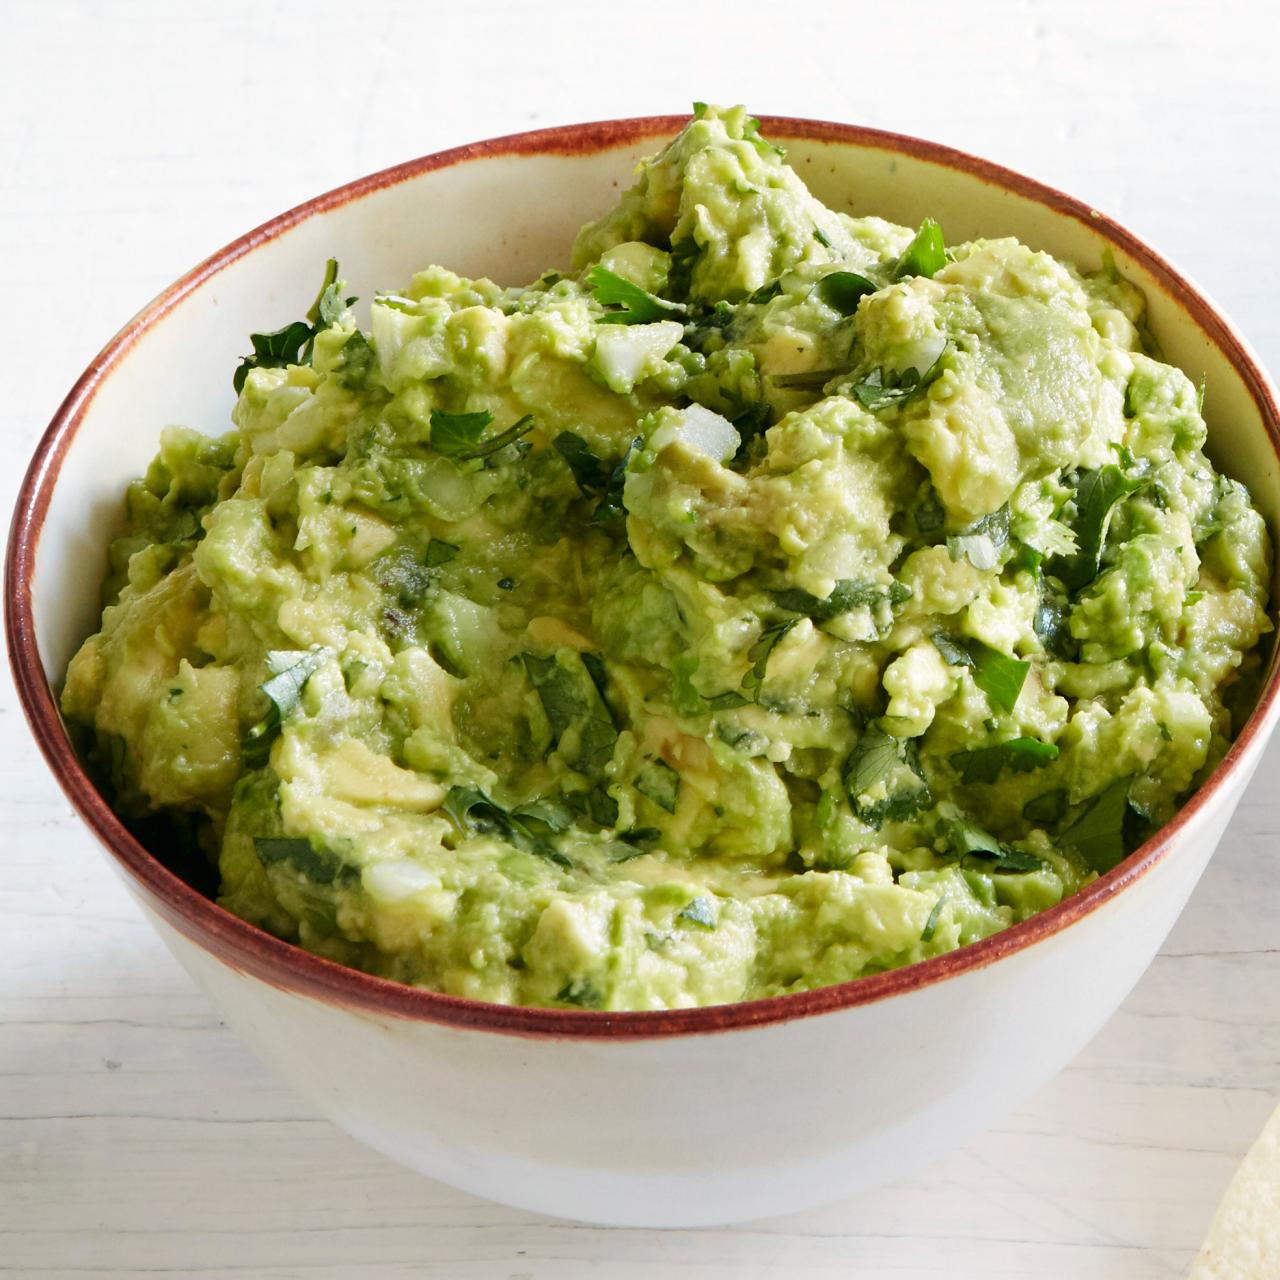 My New Fave: Avocado Masher - This Week for Dinner